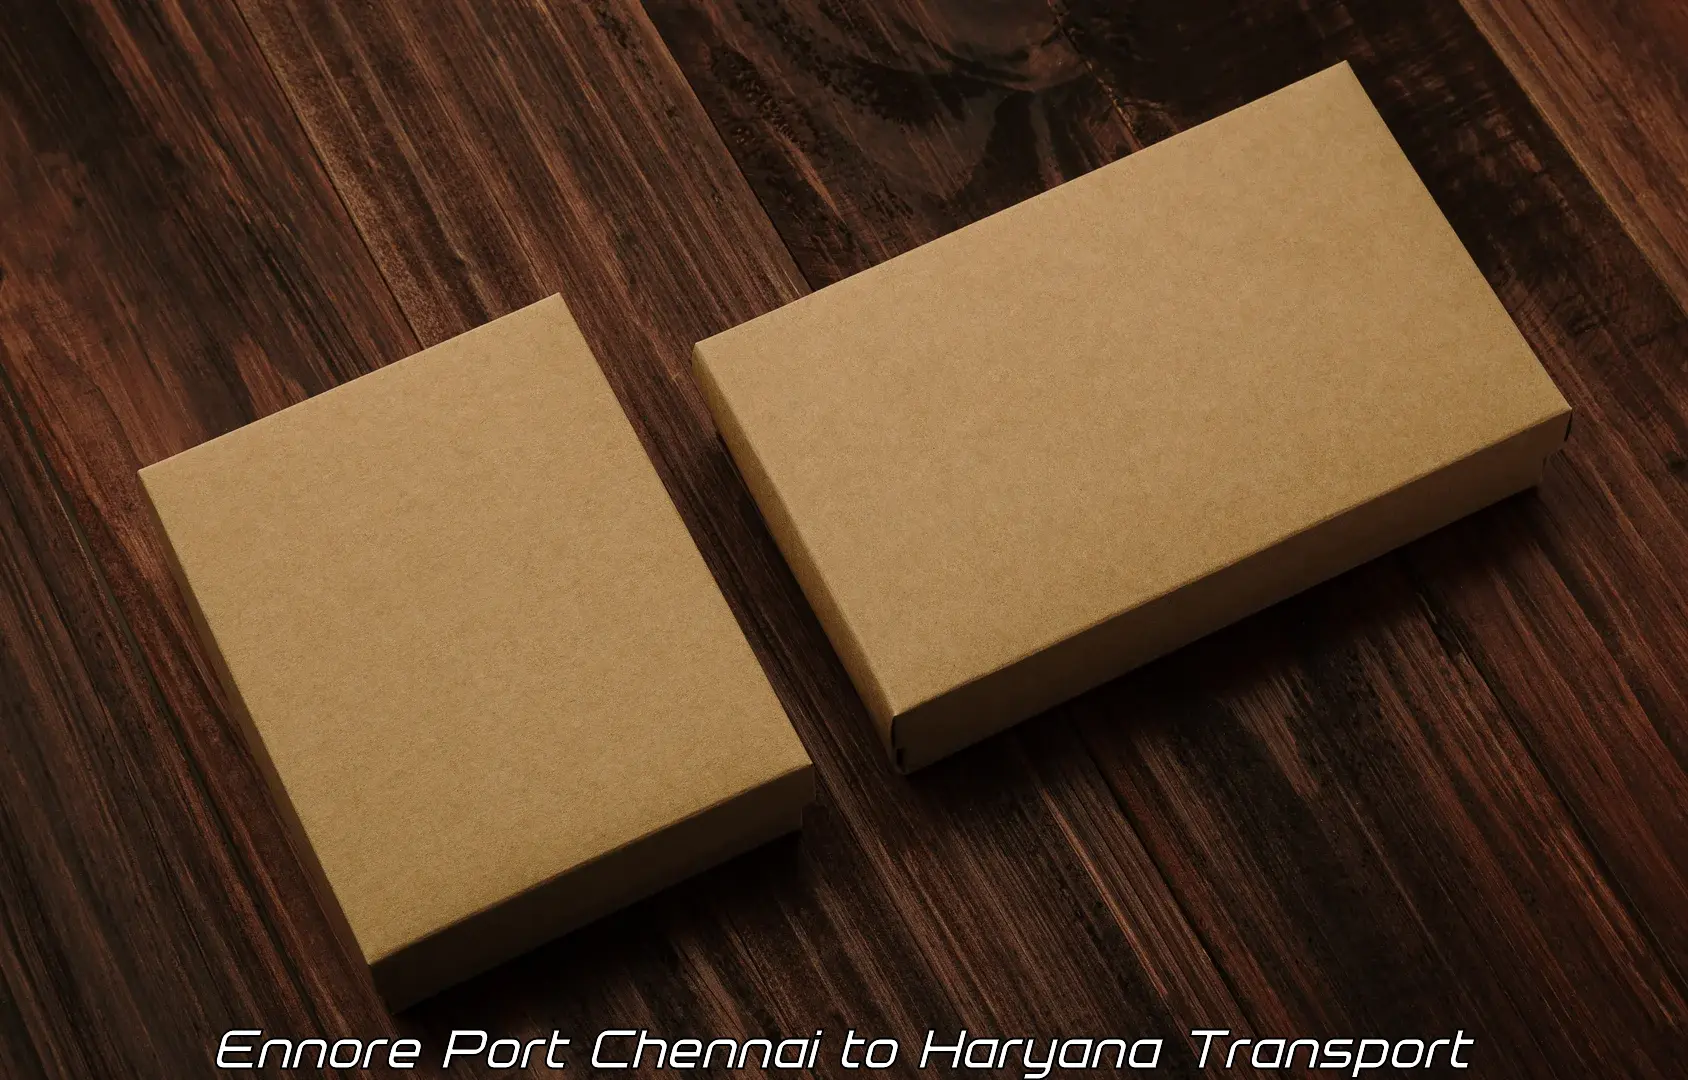 Nationwide transport services Ennore Port Chennai to Mahendragarh